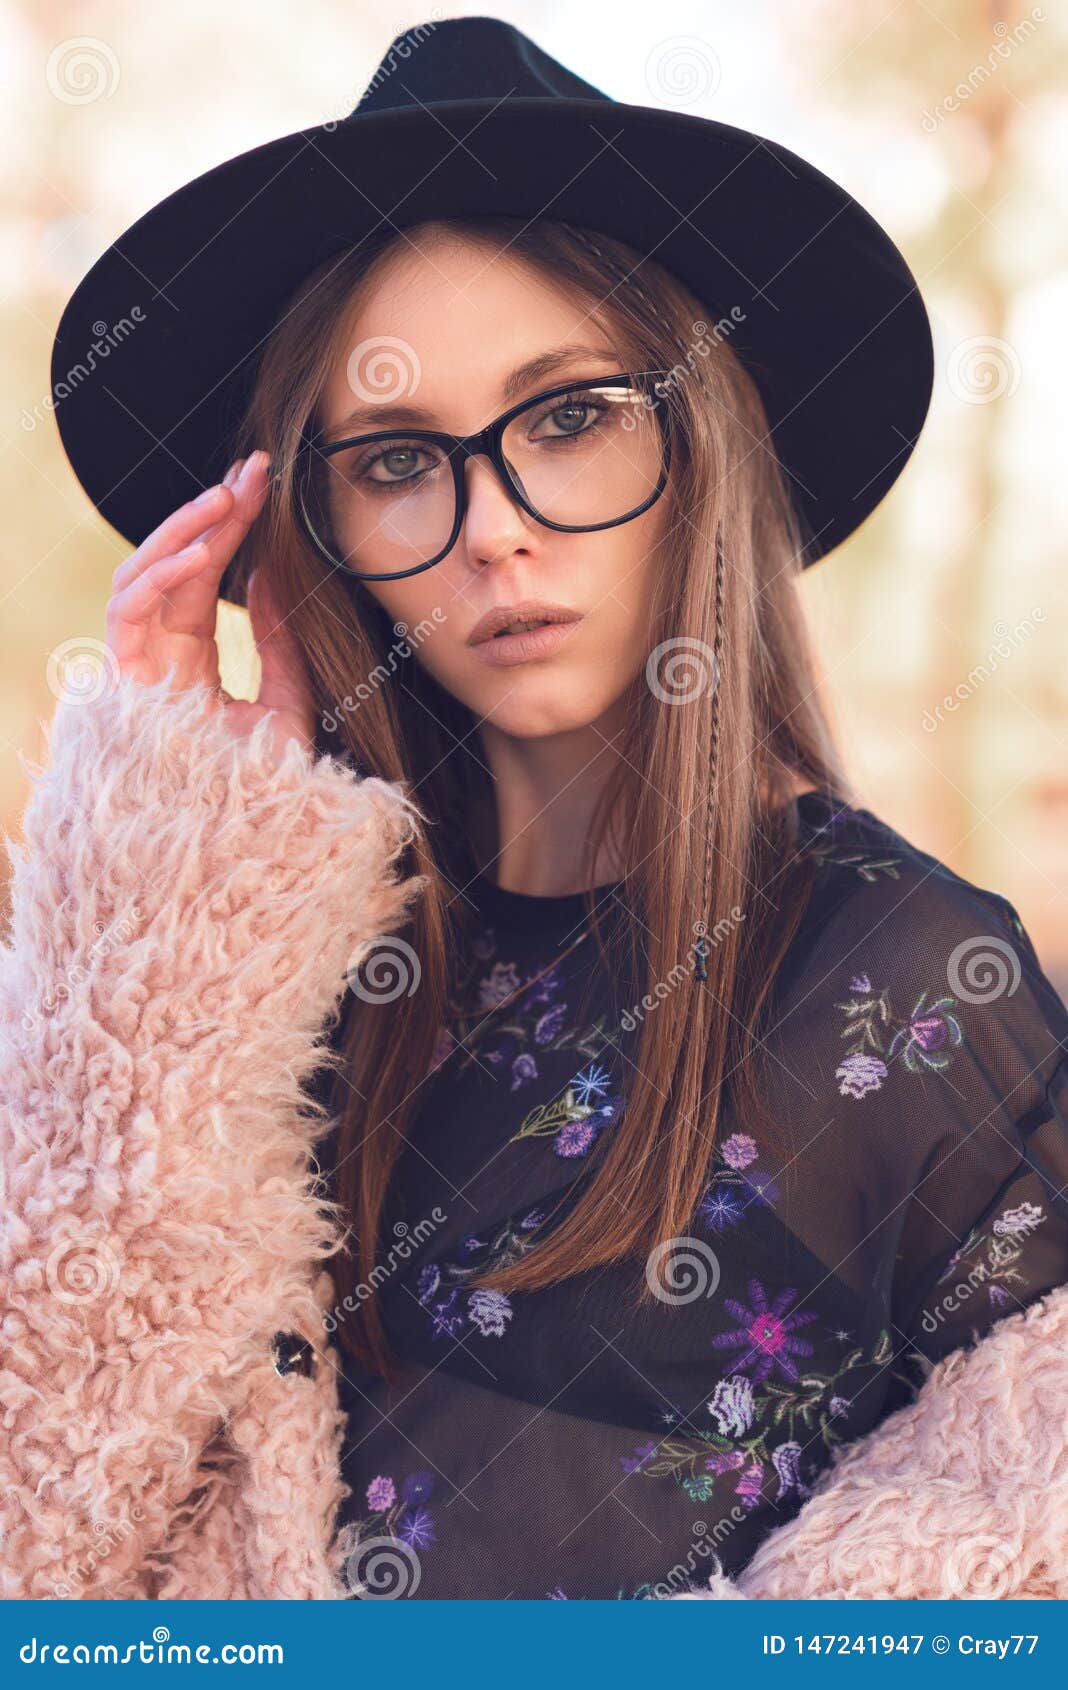 Beautiful Girl in a Fashionable Pink Lama Coat. Stock Image - Image of brunette, cute: 147241947